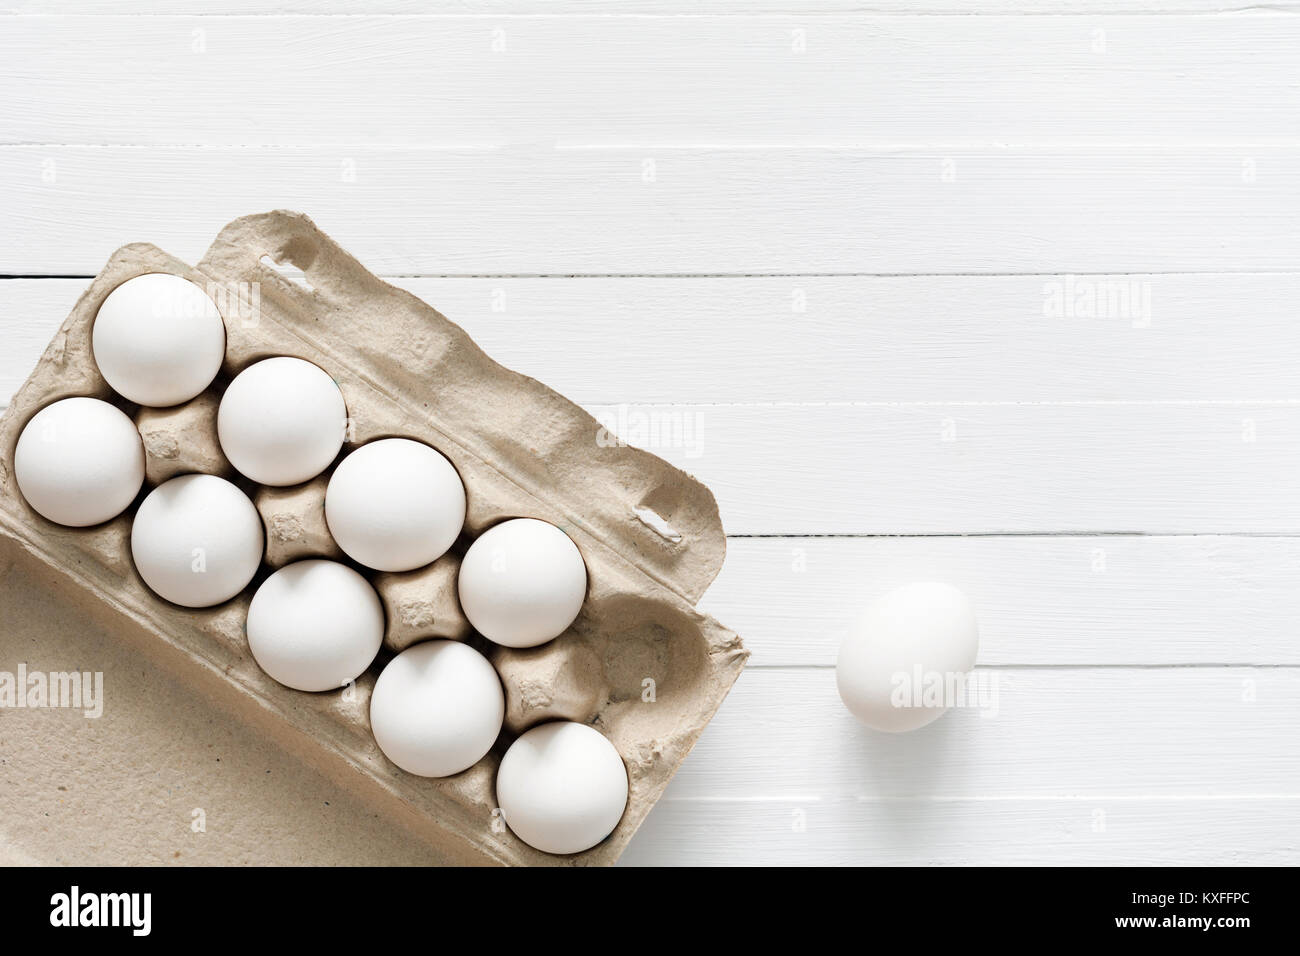 White eggs in carton box on white wooden background with copy space for text. Table top view Stock Photo